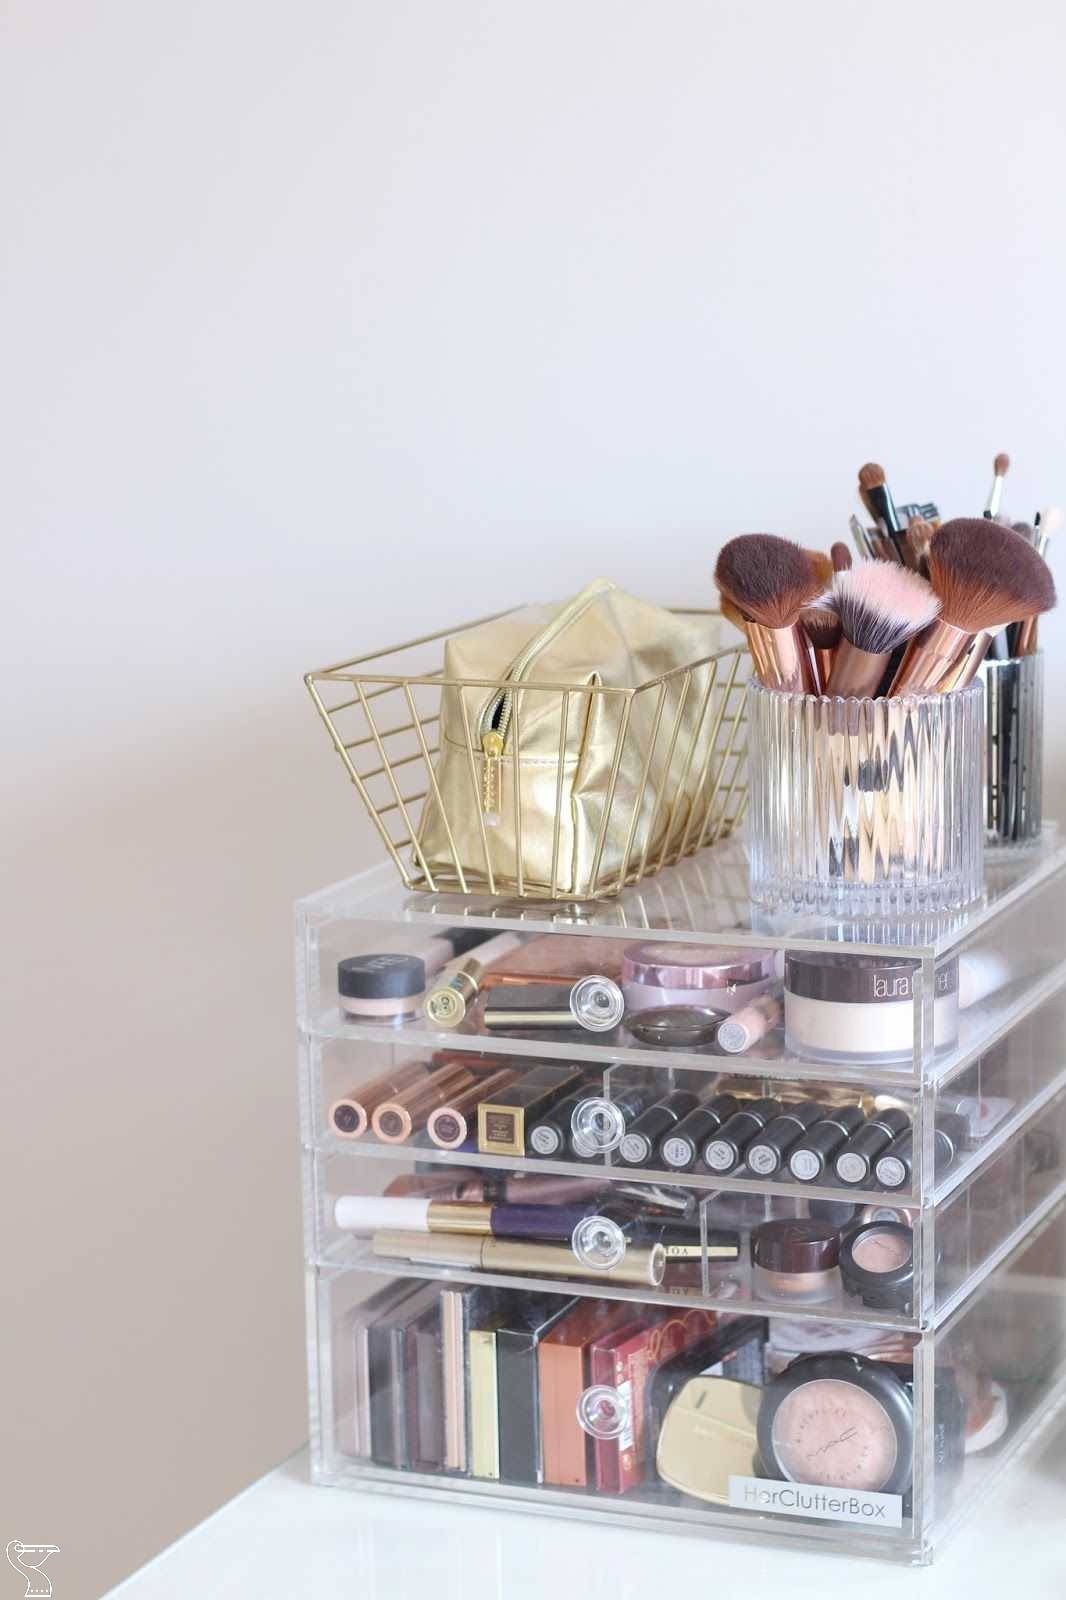 Jodie Melissa: My New And Improved Makeup Storage #makeuporganization - Jodie Melissa: My New And Improved Makeup Storage #makeuporganization -   16 diy Storage makeup ideas